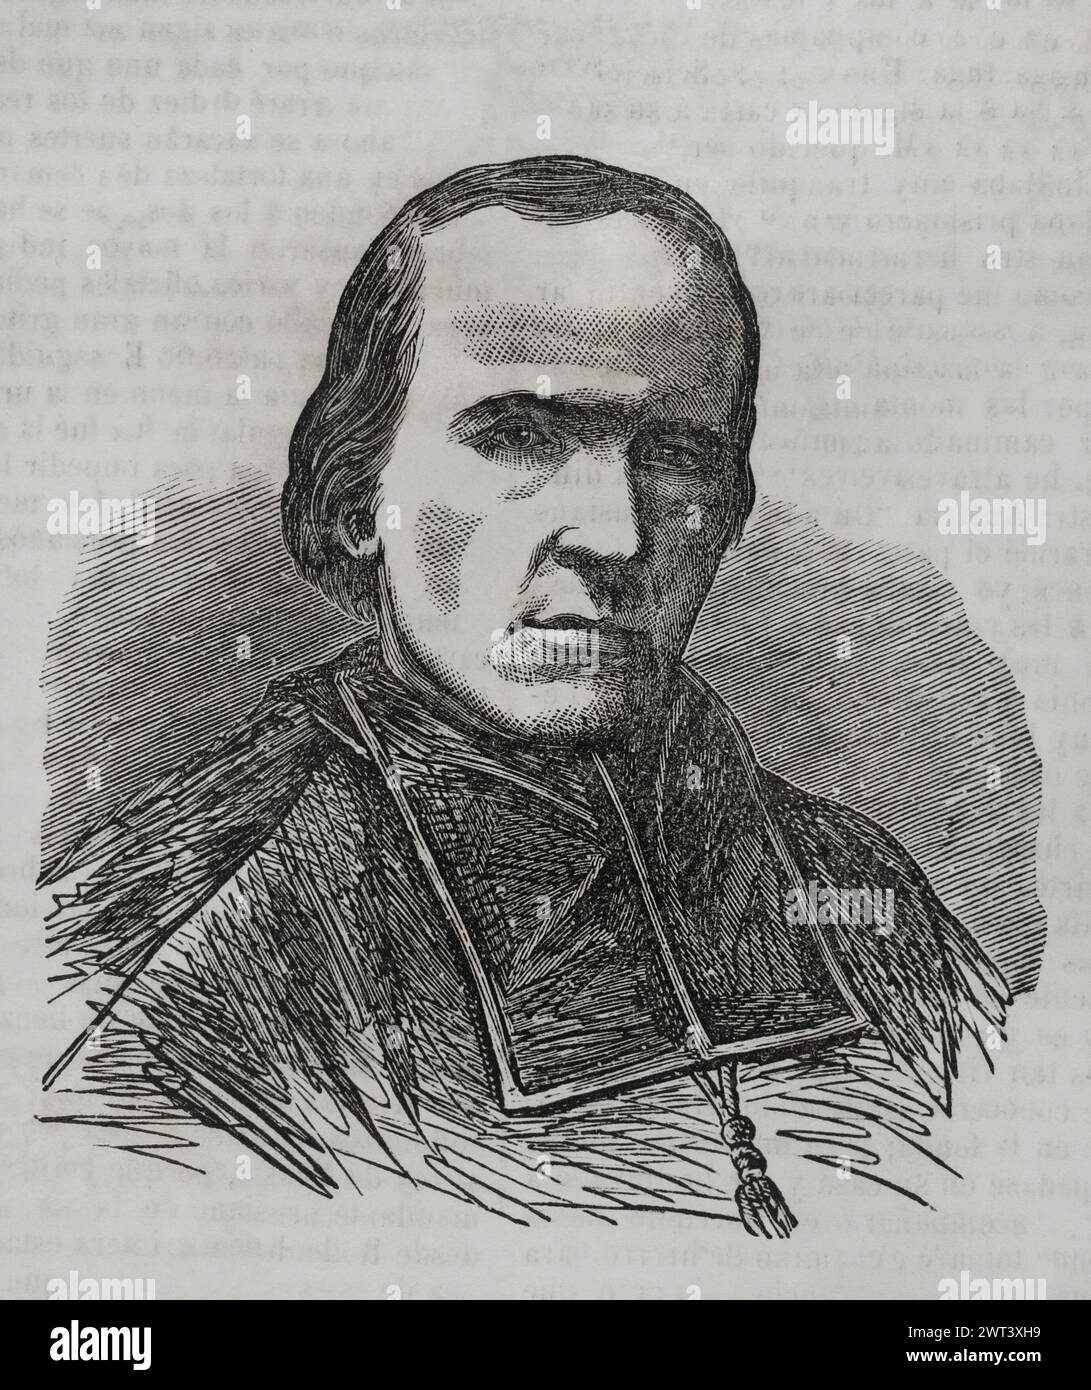 Georges Darboy (1813-1871). Catholic priest, bishop of Nancy, archbishop of Paris and ecclesiastical writer. During the Paris Commune he was arrested and executed on 24 May 1871 by the revolutionaries. Portrait. Engraving. 'Historia de la Guerra de Francia y Prusia' (History of the War between France and Prussia). Volume II. Published in Barcelona, 1871. Stock Photo